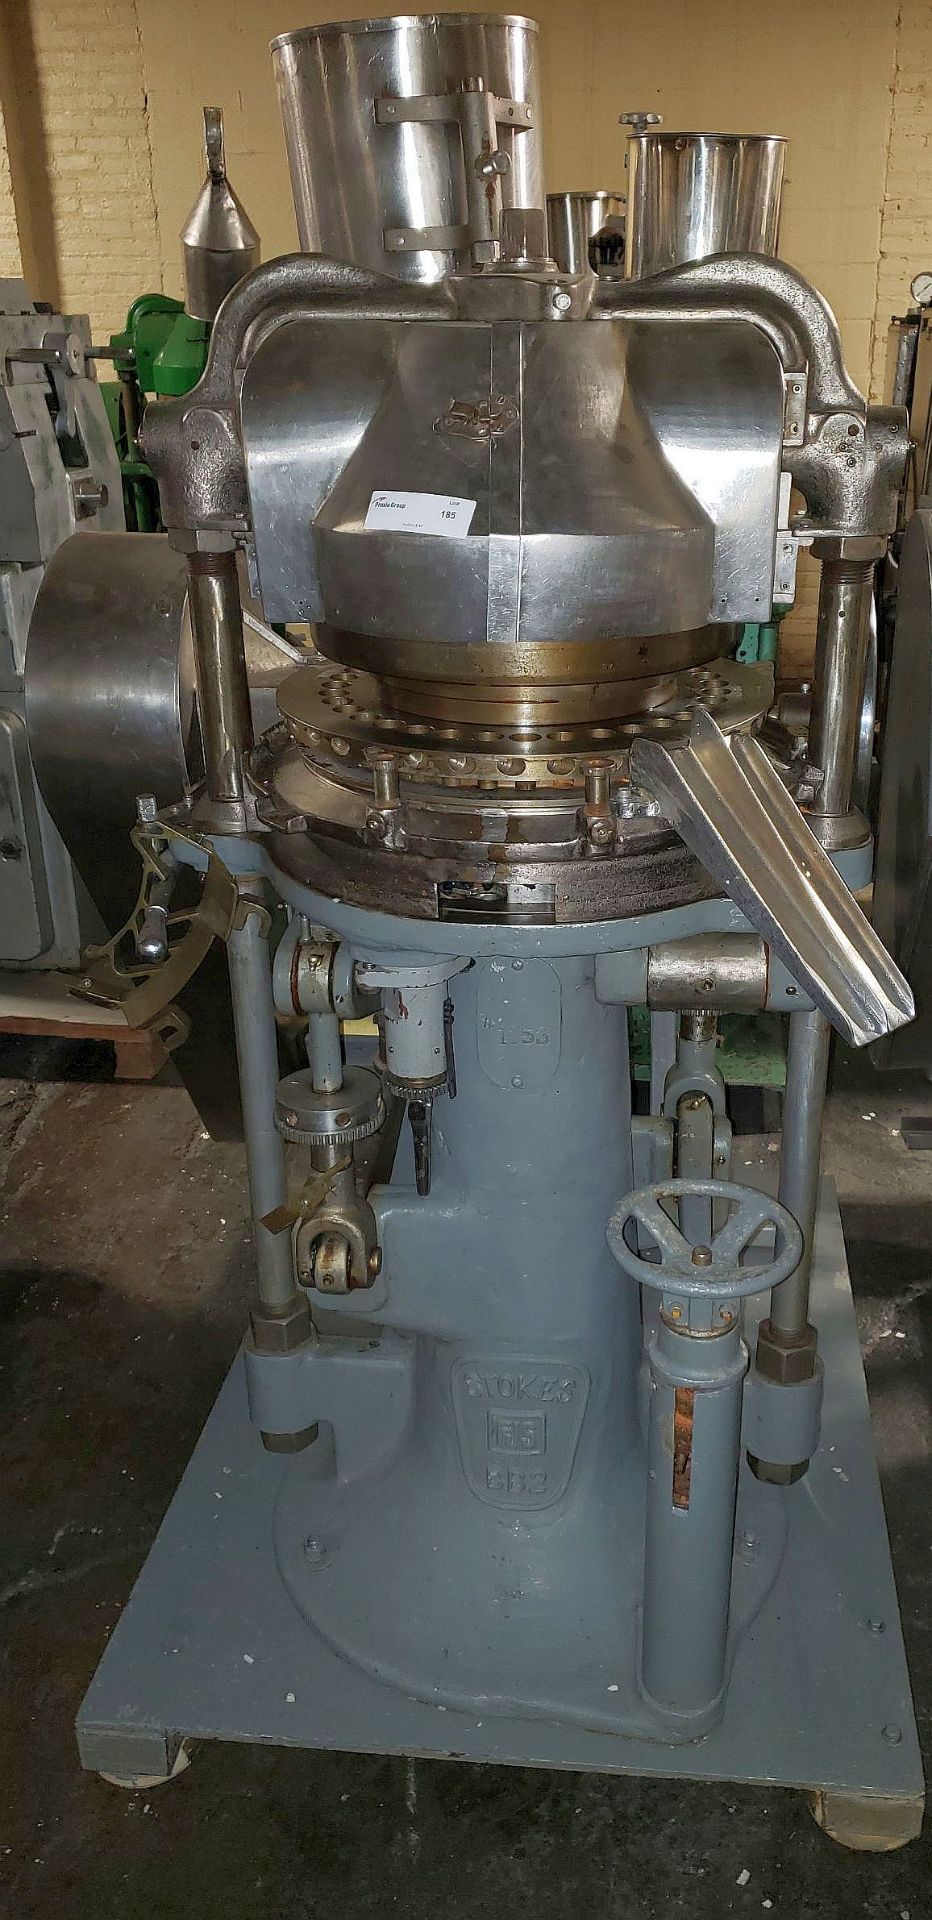 Stokes rotary tablet press. model BB2, 35 station, double sided, keyed upper punch guides, with